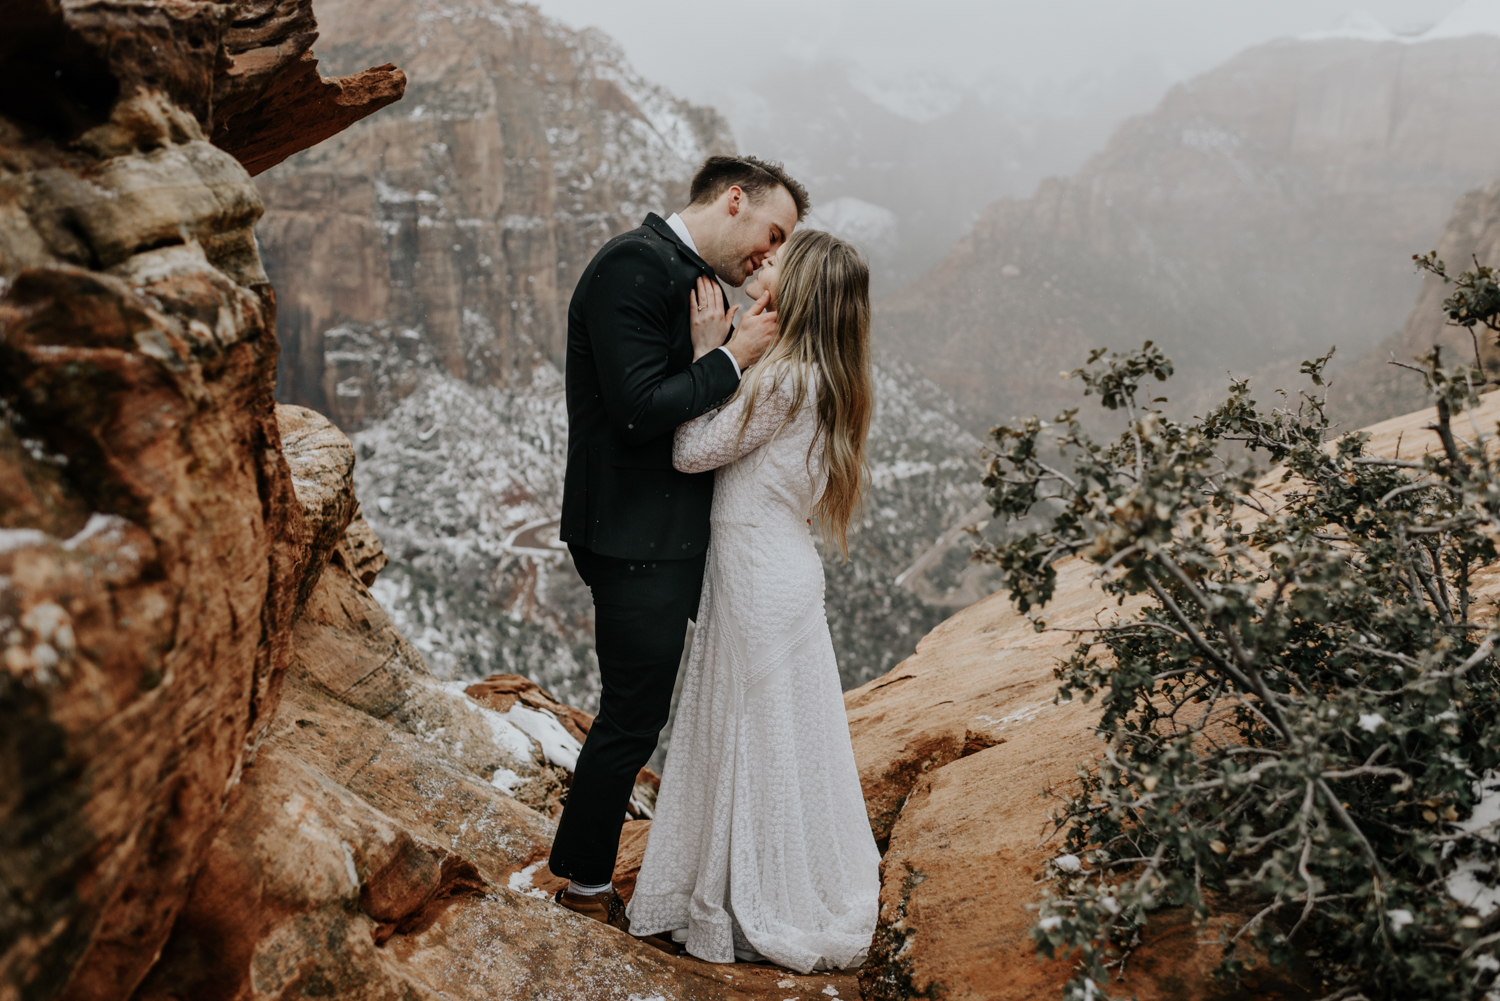 Outdoor lovers at Zion National Park